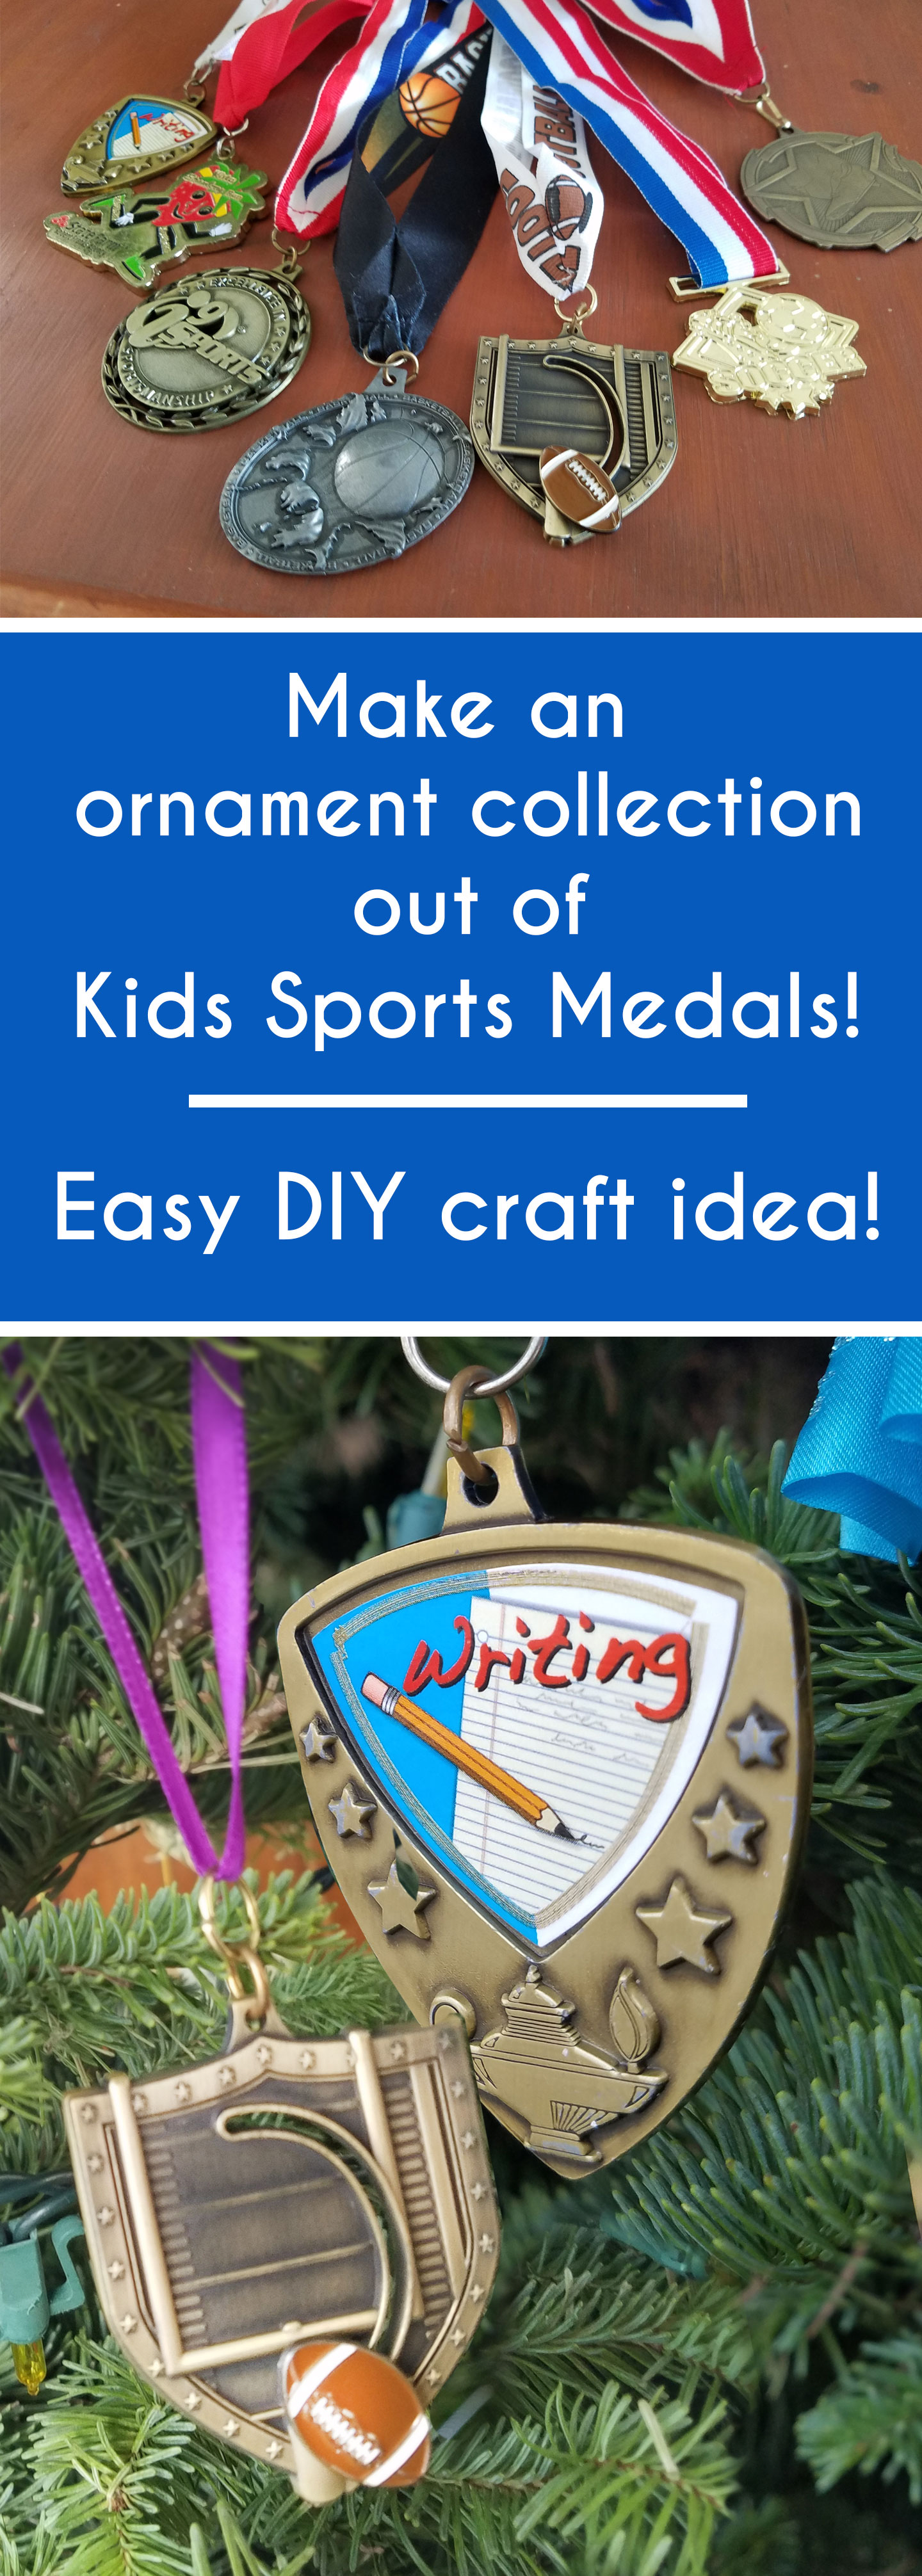 diy ornament out of kids sports medals